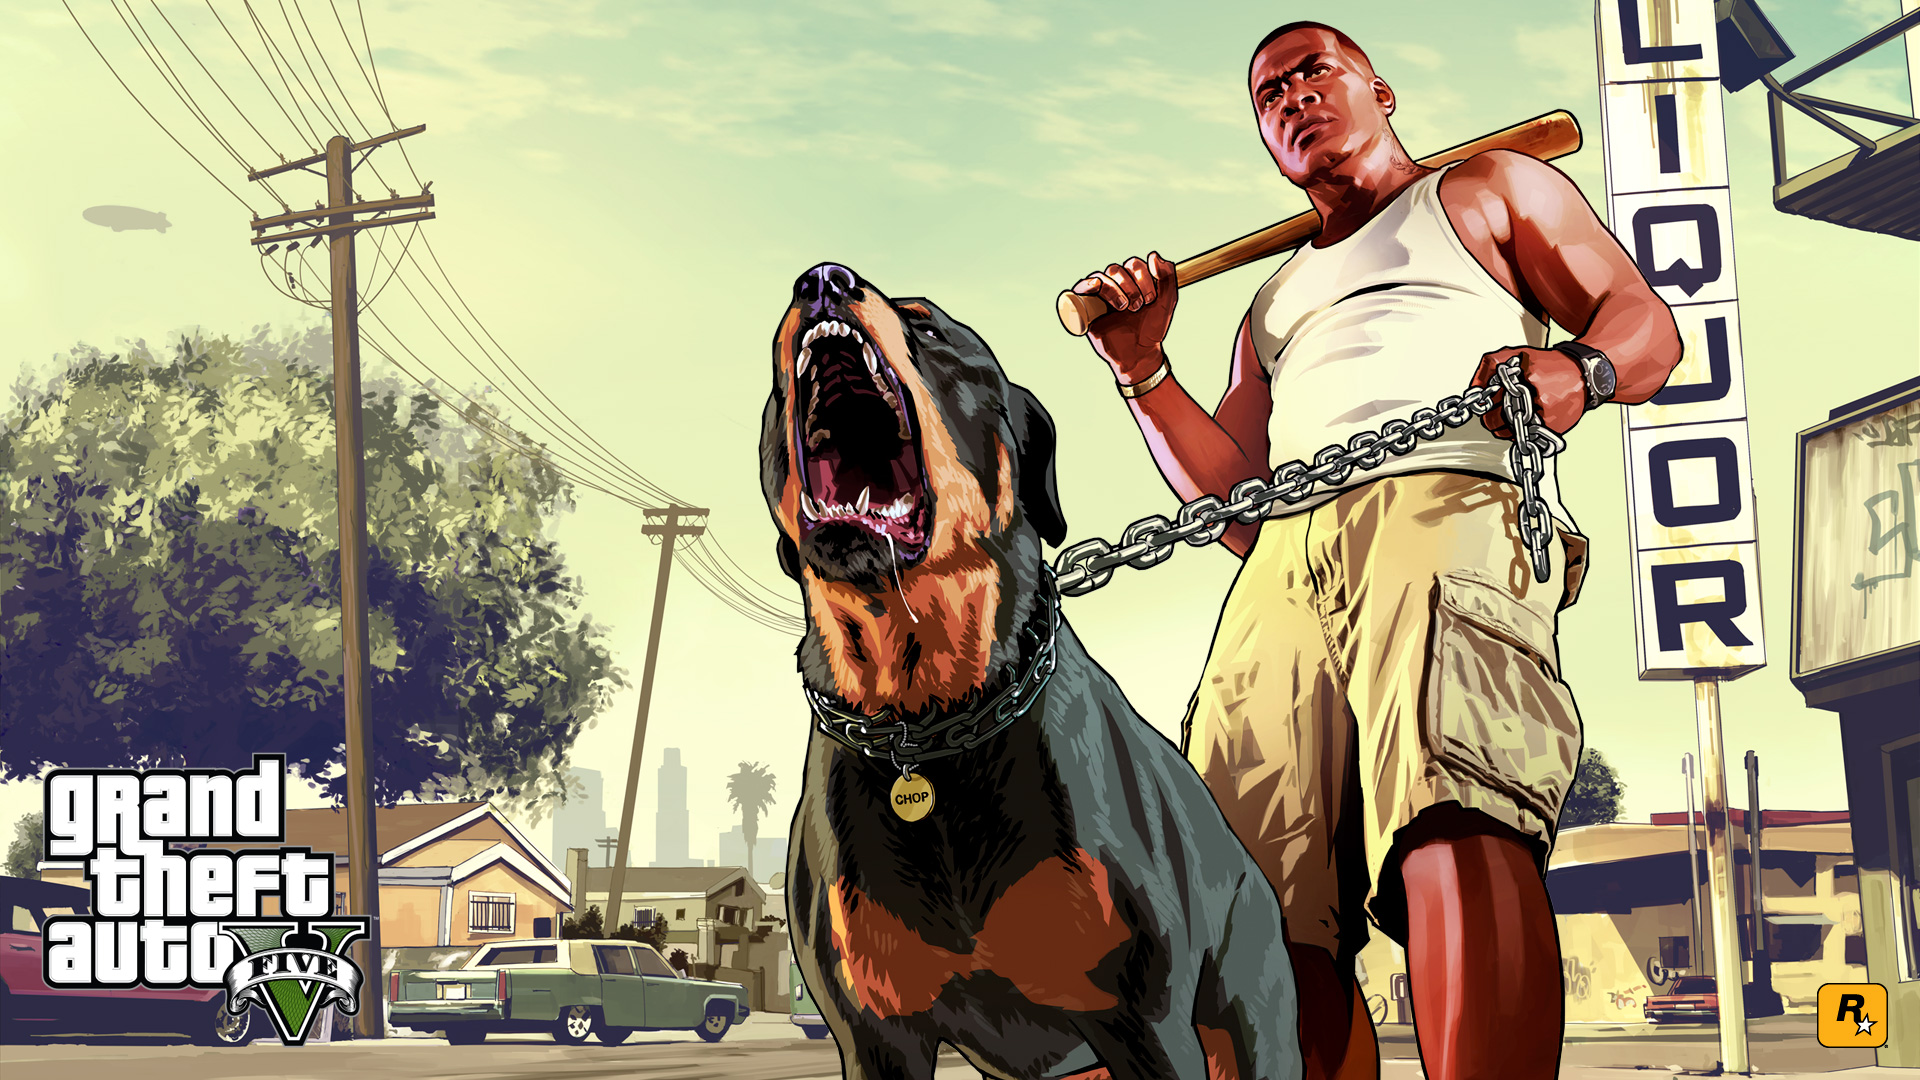 Grand theft auto v 1.0.1180.2 patch download torrent